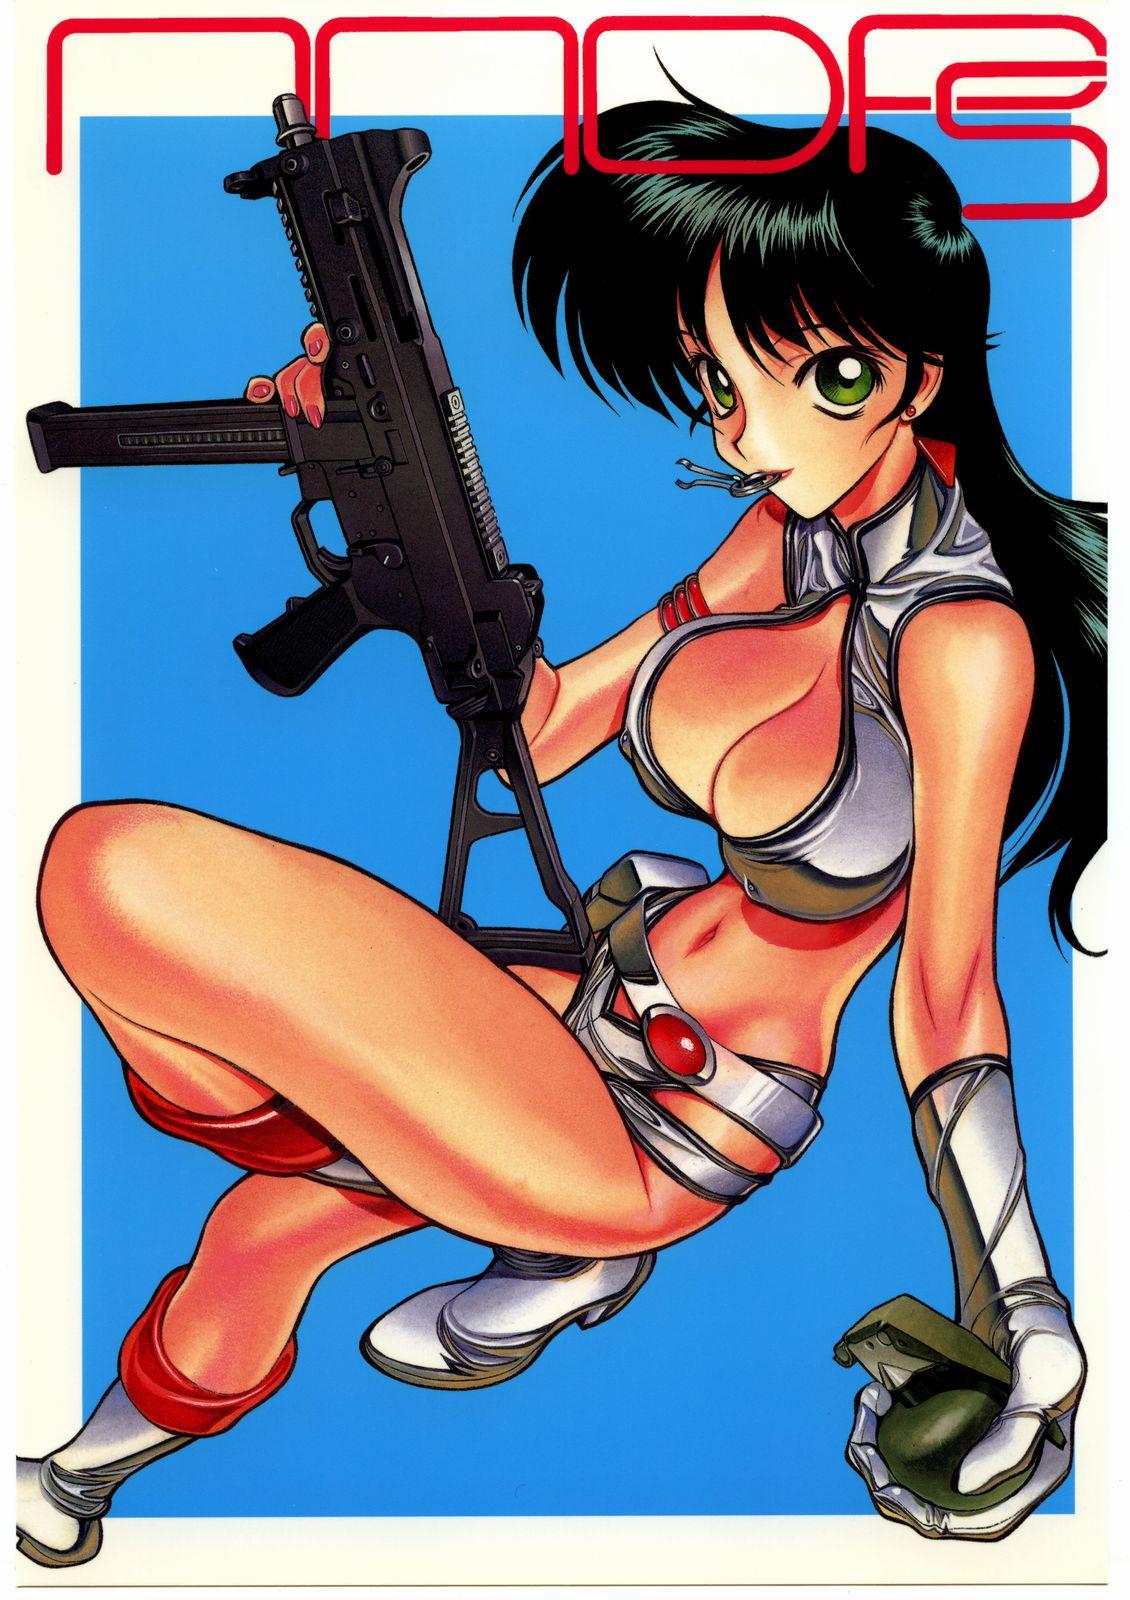 Vip NNDP 5 - Dirty pair Super - Picture 1